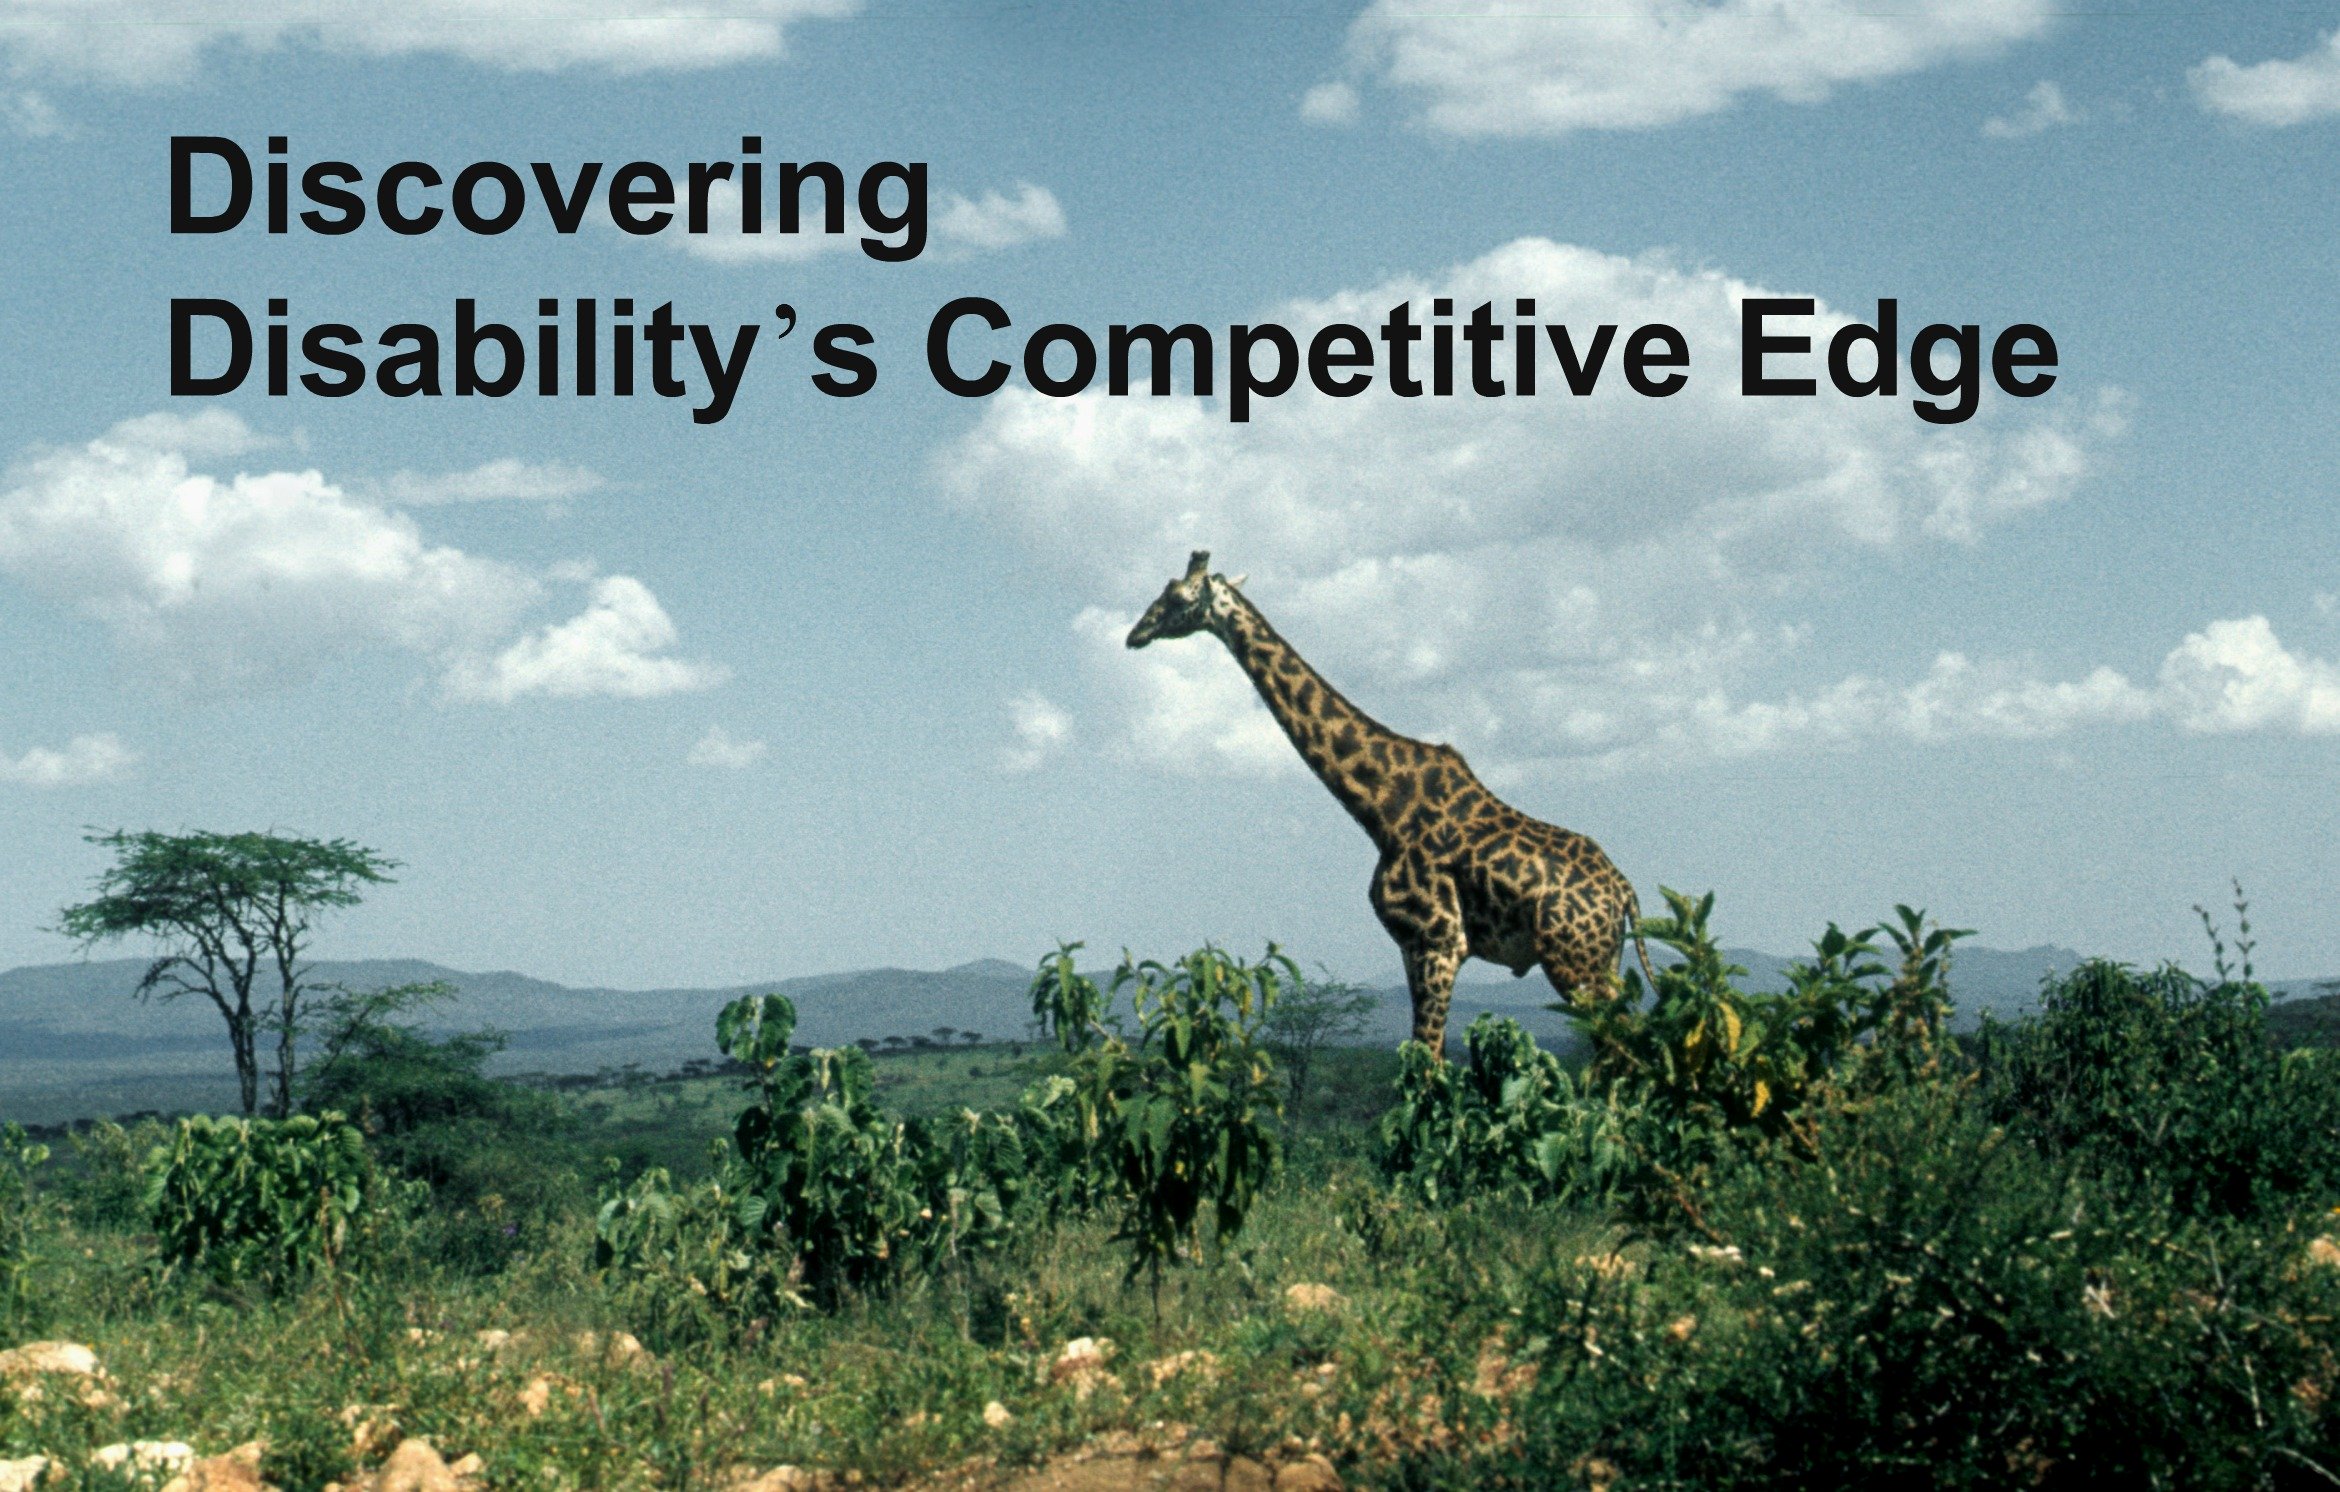 Giraffe in the wild in Africa, towering above tress; Caption reads: "Discovering Disabilitiy's Competitive Edge"